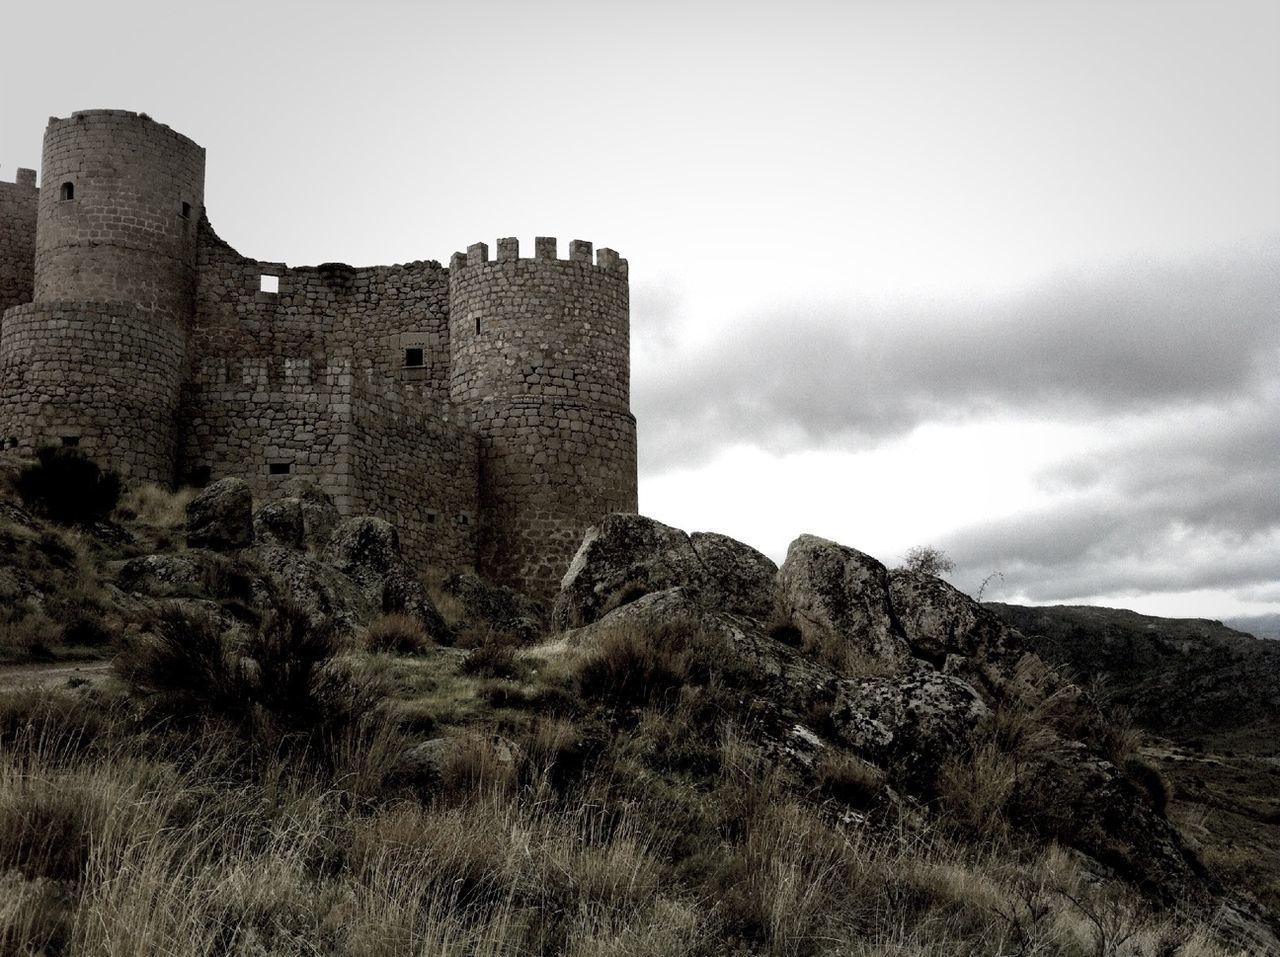 architecture, built structure, building exterior, history, old ruin, sky, the past, old, ancient, stone wall, damaged, low angle view, ancient civilization, ruined, cloud - sky, castle, abandoned, landscape, day, travel destinations